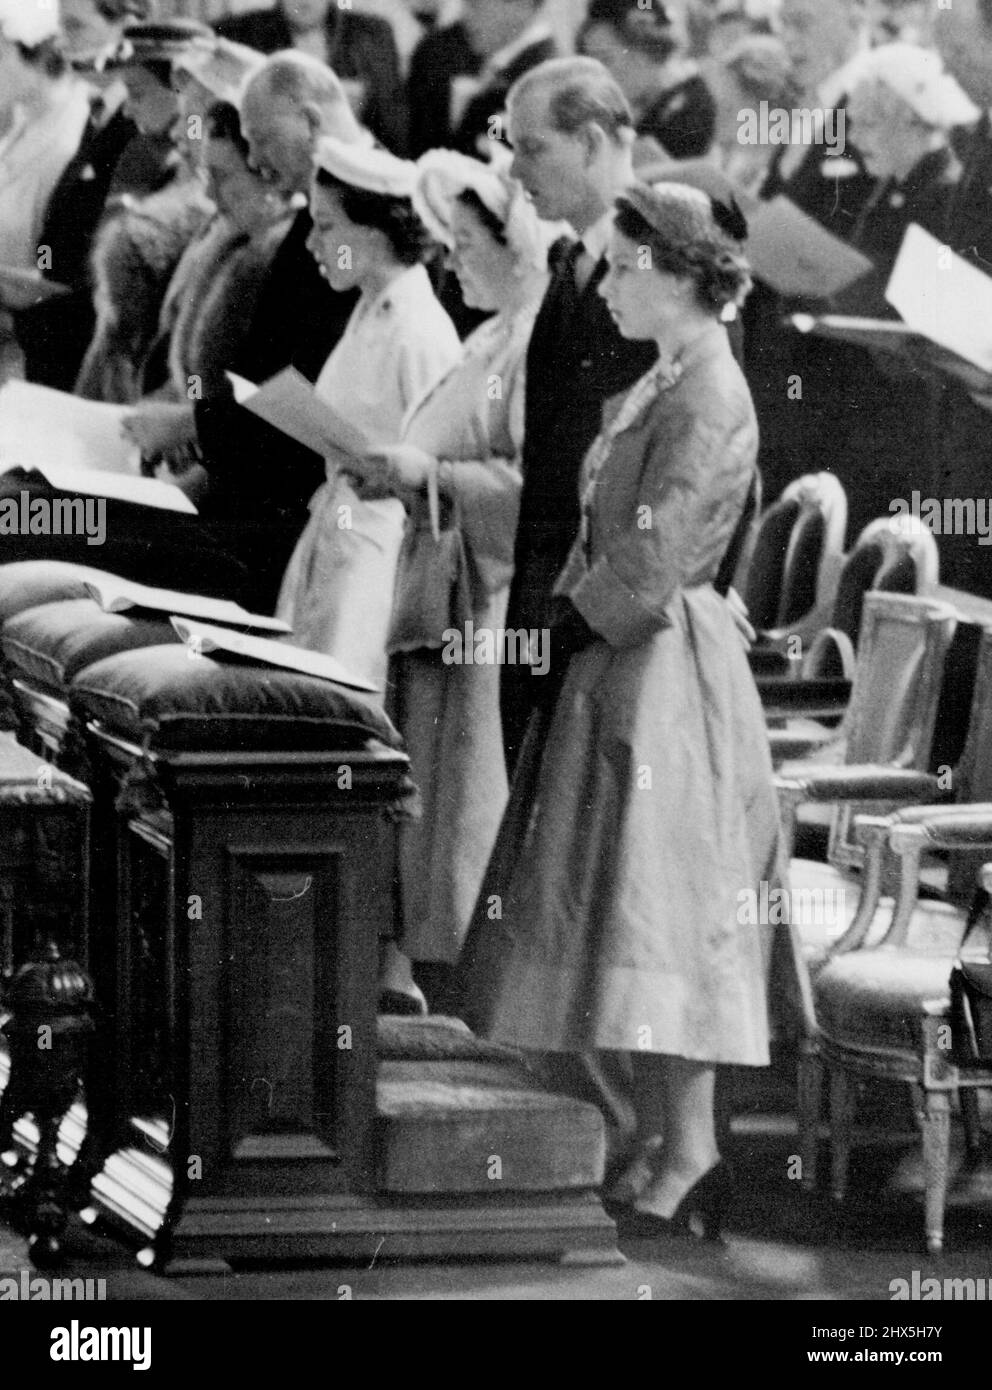 Queen And The Duke Go To St. Paul's Service The Queen, with the Duke of Edinburgh and Queen Elizabeth the Queen Mother are pictured during the Coronation Thanksgiving Service at St. Paul's Cathedral, London, to-day. The Queen drove from Buckingham Palace to attend the service, at which Dr. Fisher, the Archbishop of Canterbury, preached the sermon. Sir Winston Churchill, the Prime Minister, read the lesson. June 6, 1953. Stock Photo